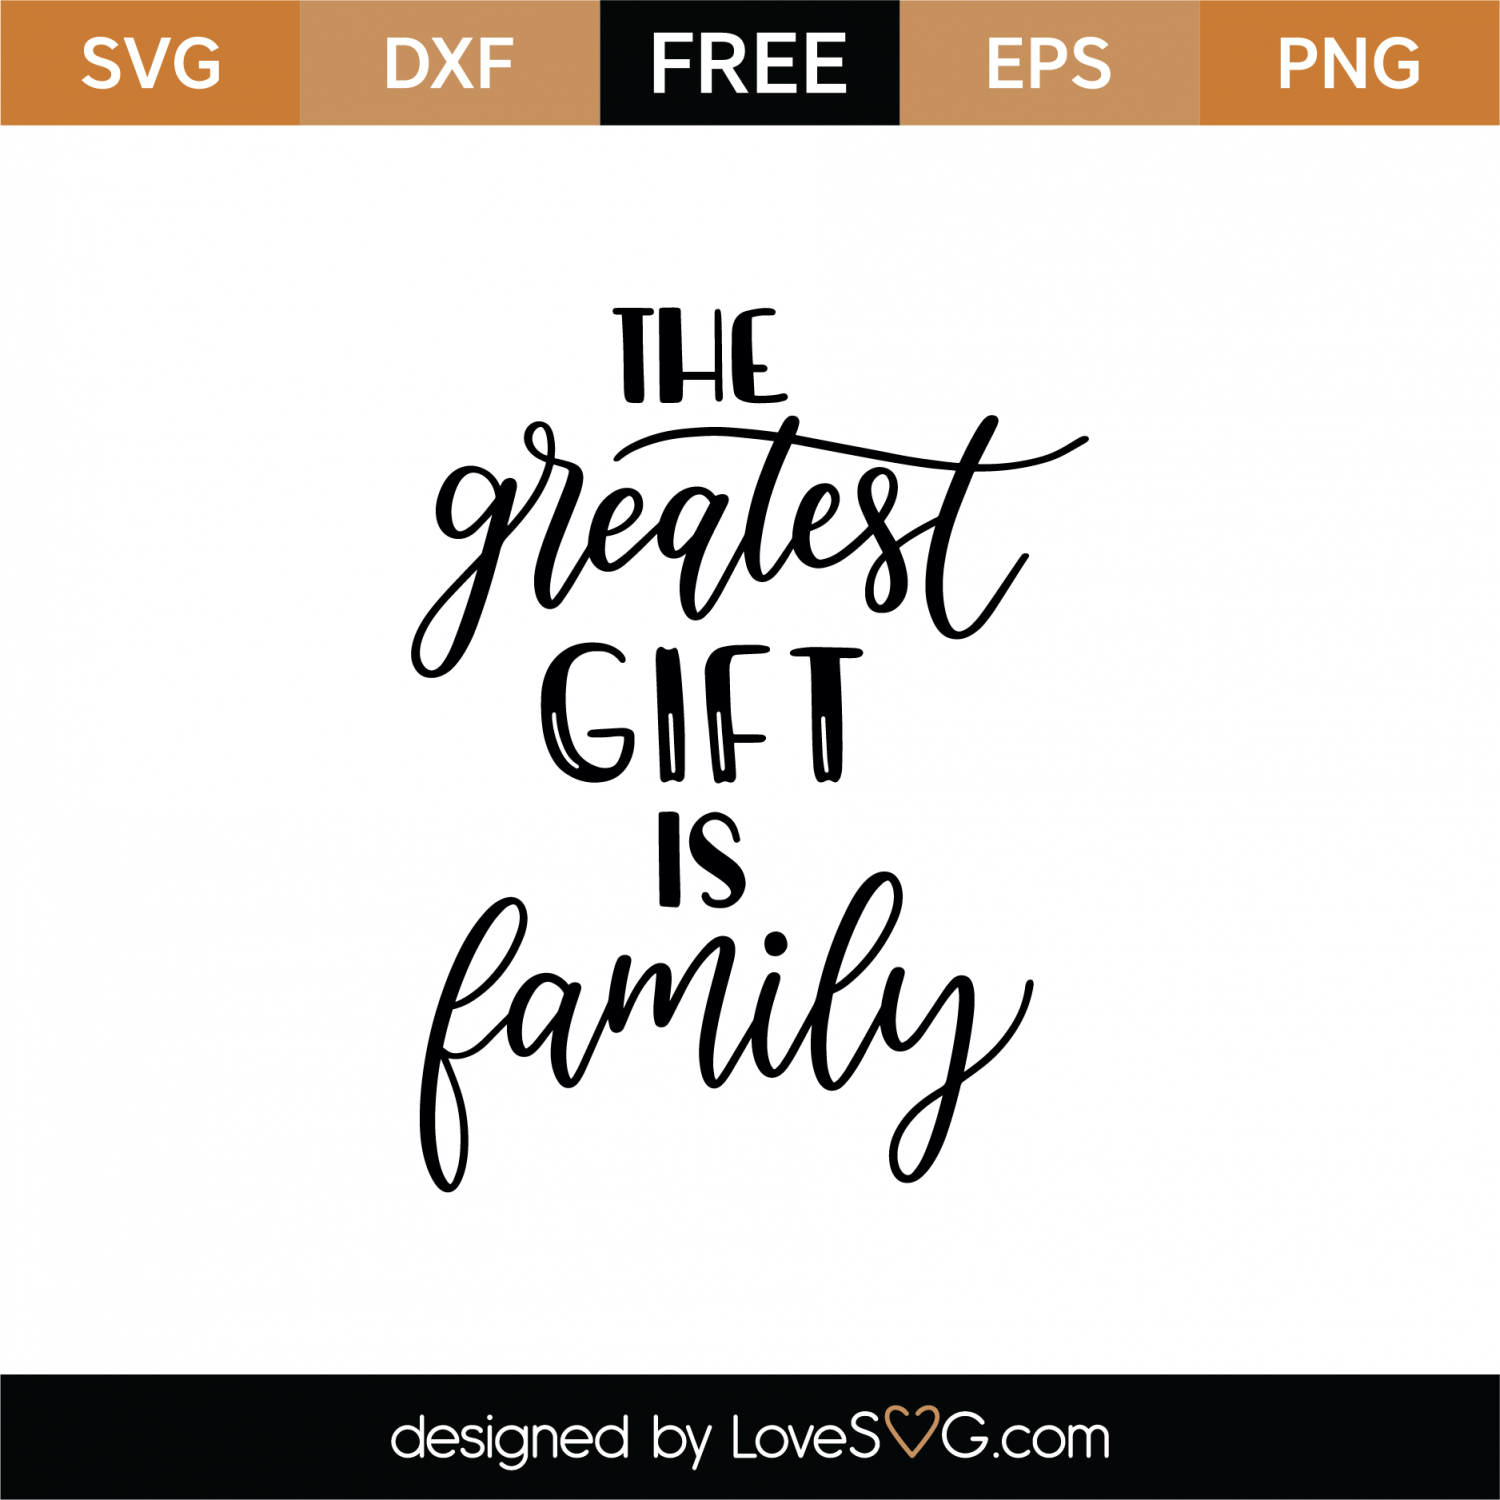 Download Free The Greatest Gift Is Family SVG Cut File | Lovesvg.com